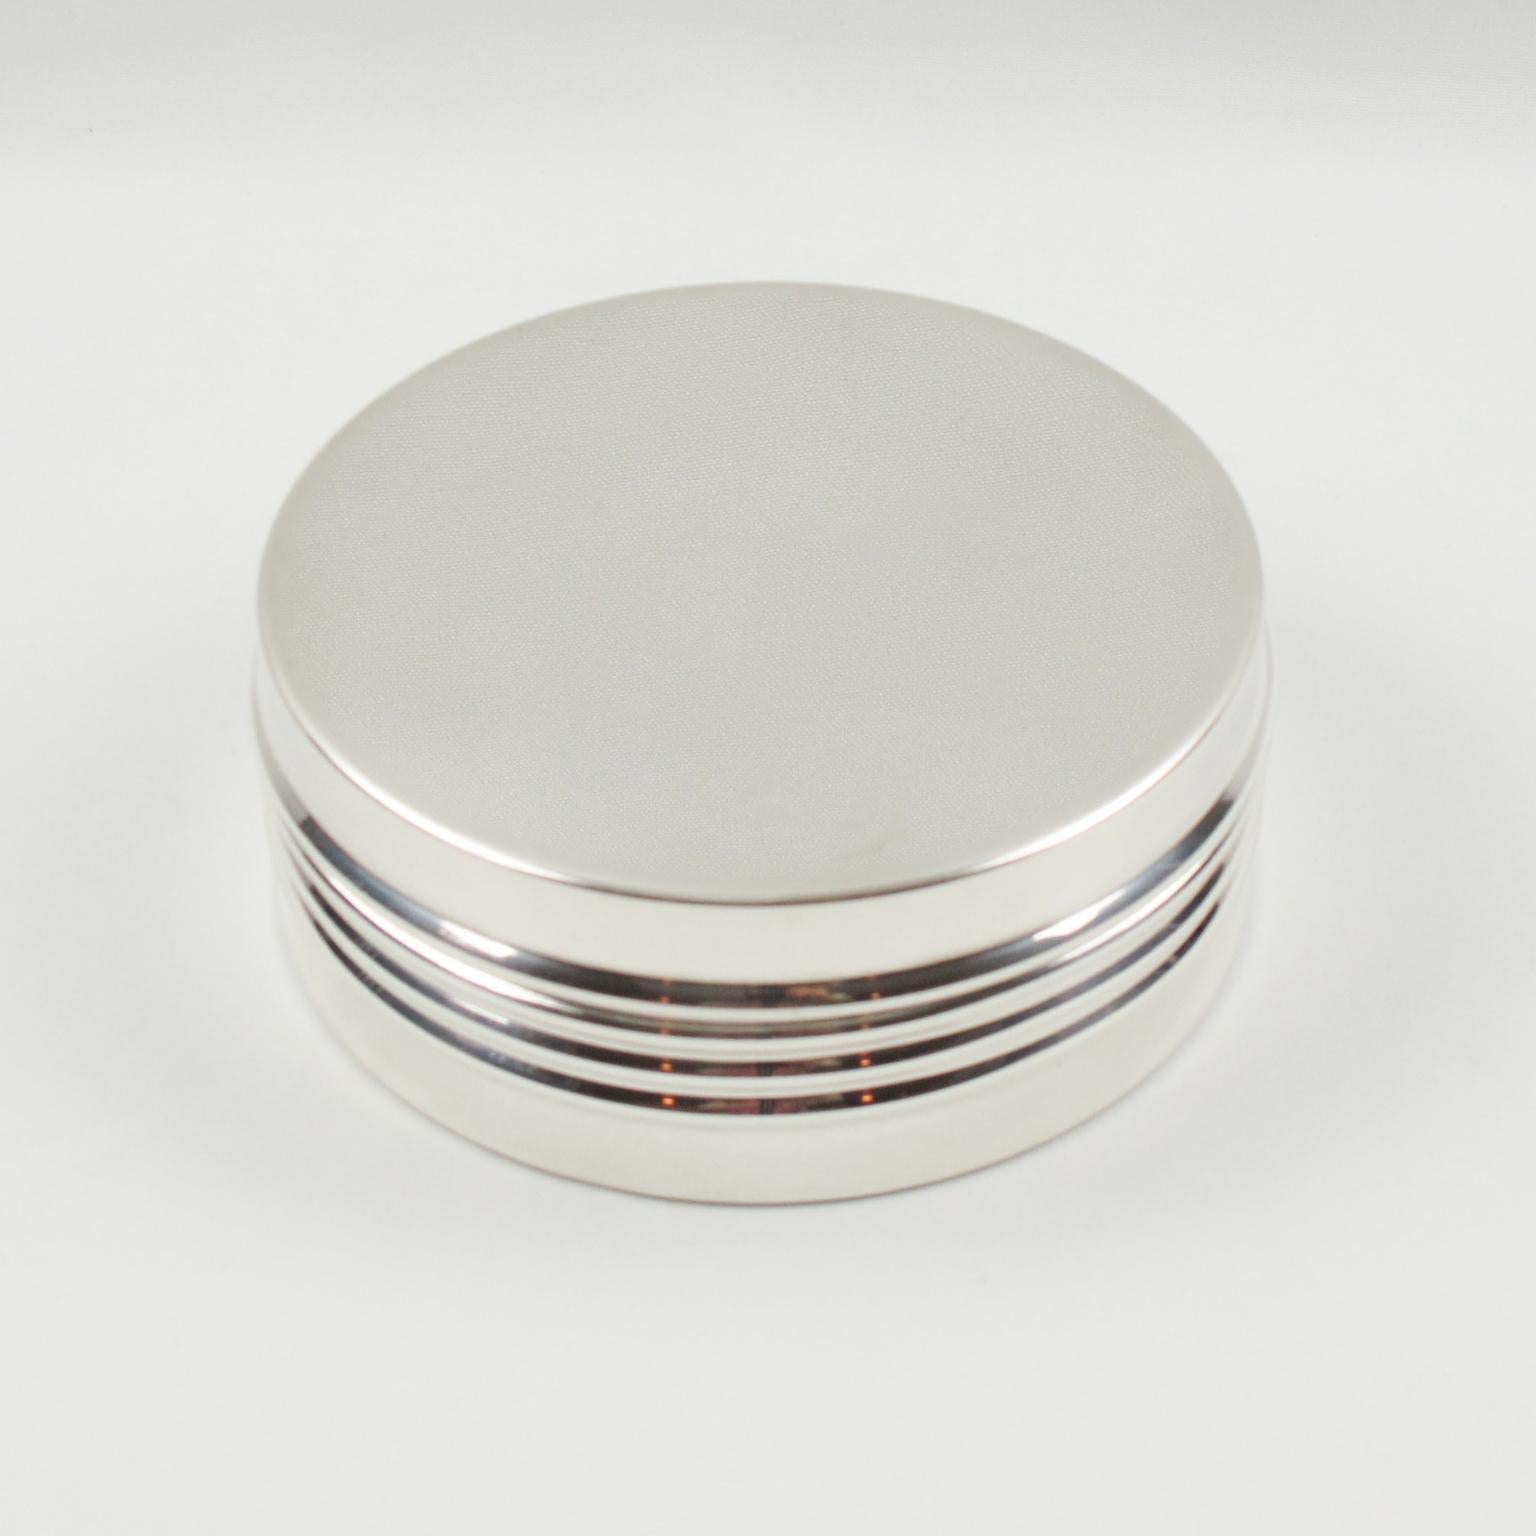 Beautiful modernist silver plate decorative box designed by Christian Dior for his home collection. Elegant minimal rounded shape with lid and refined carved ornamental gadrooning pattern all around. Marked underside 